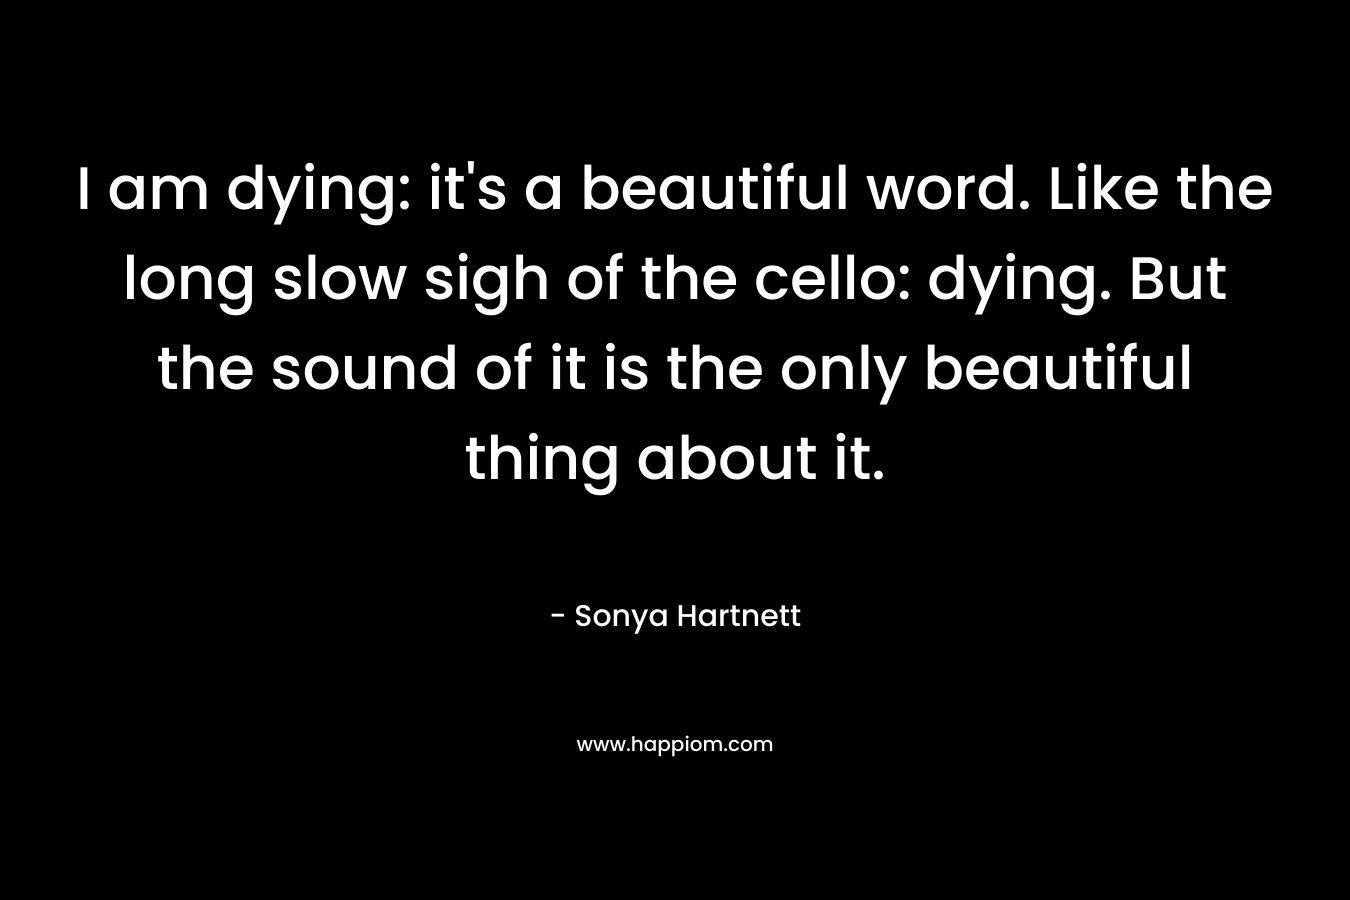 I am dying: it’s a beautiful word. Like the long slow sigh of the cello: dying. But the sound of it is the only beautiful thing about it. – Sonya Hartnett